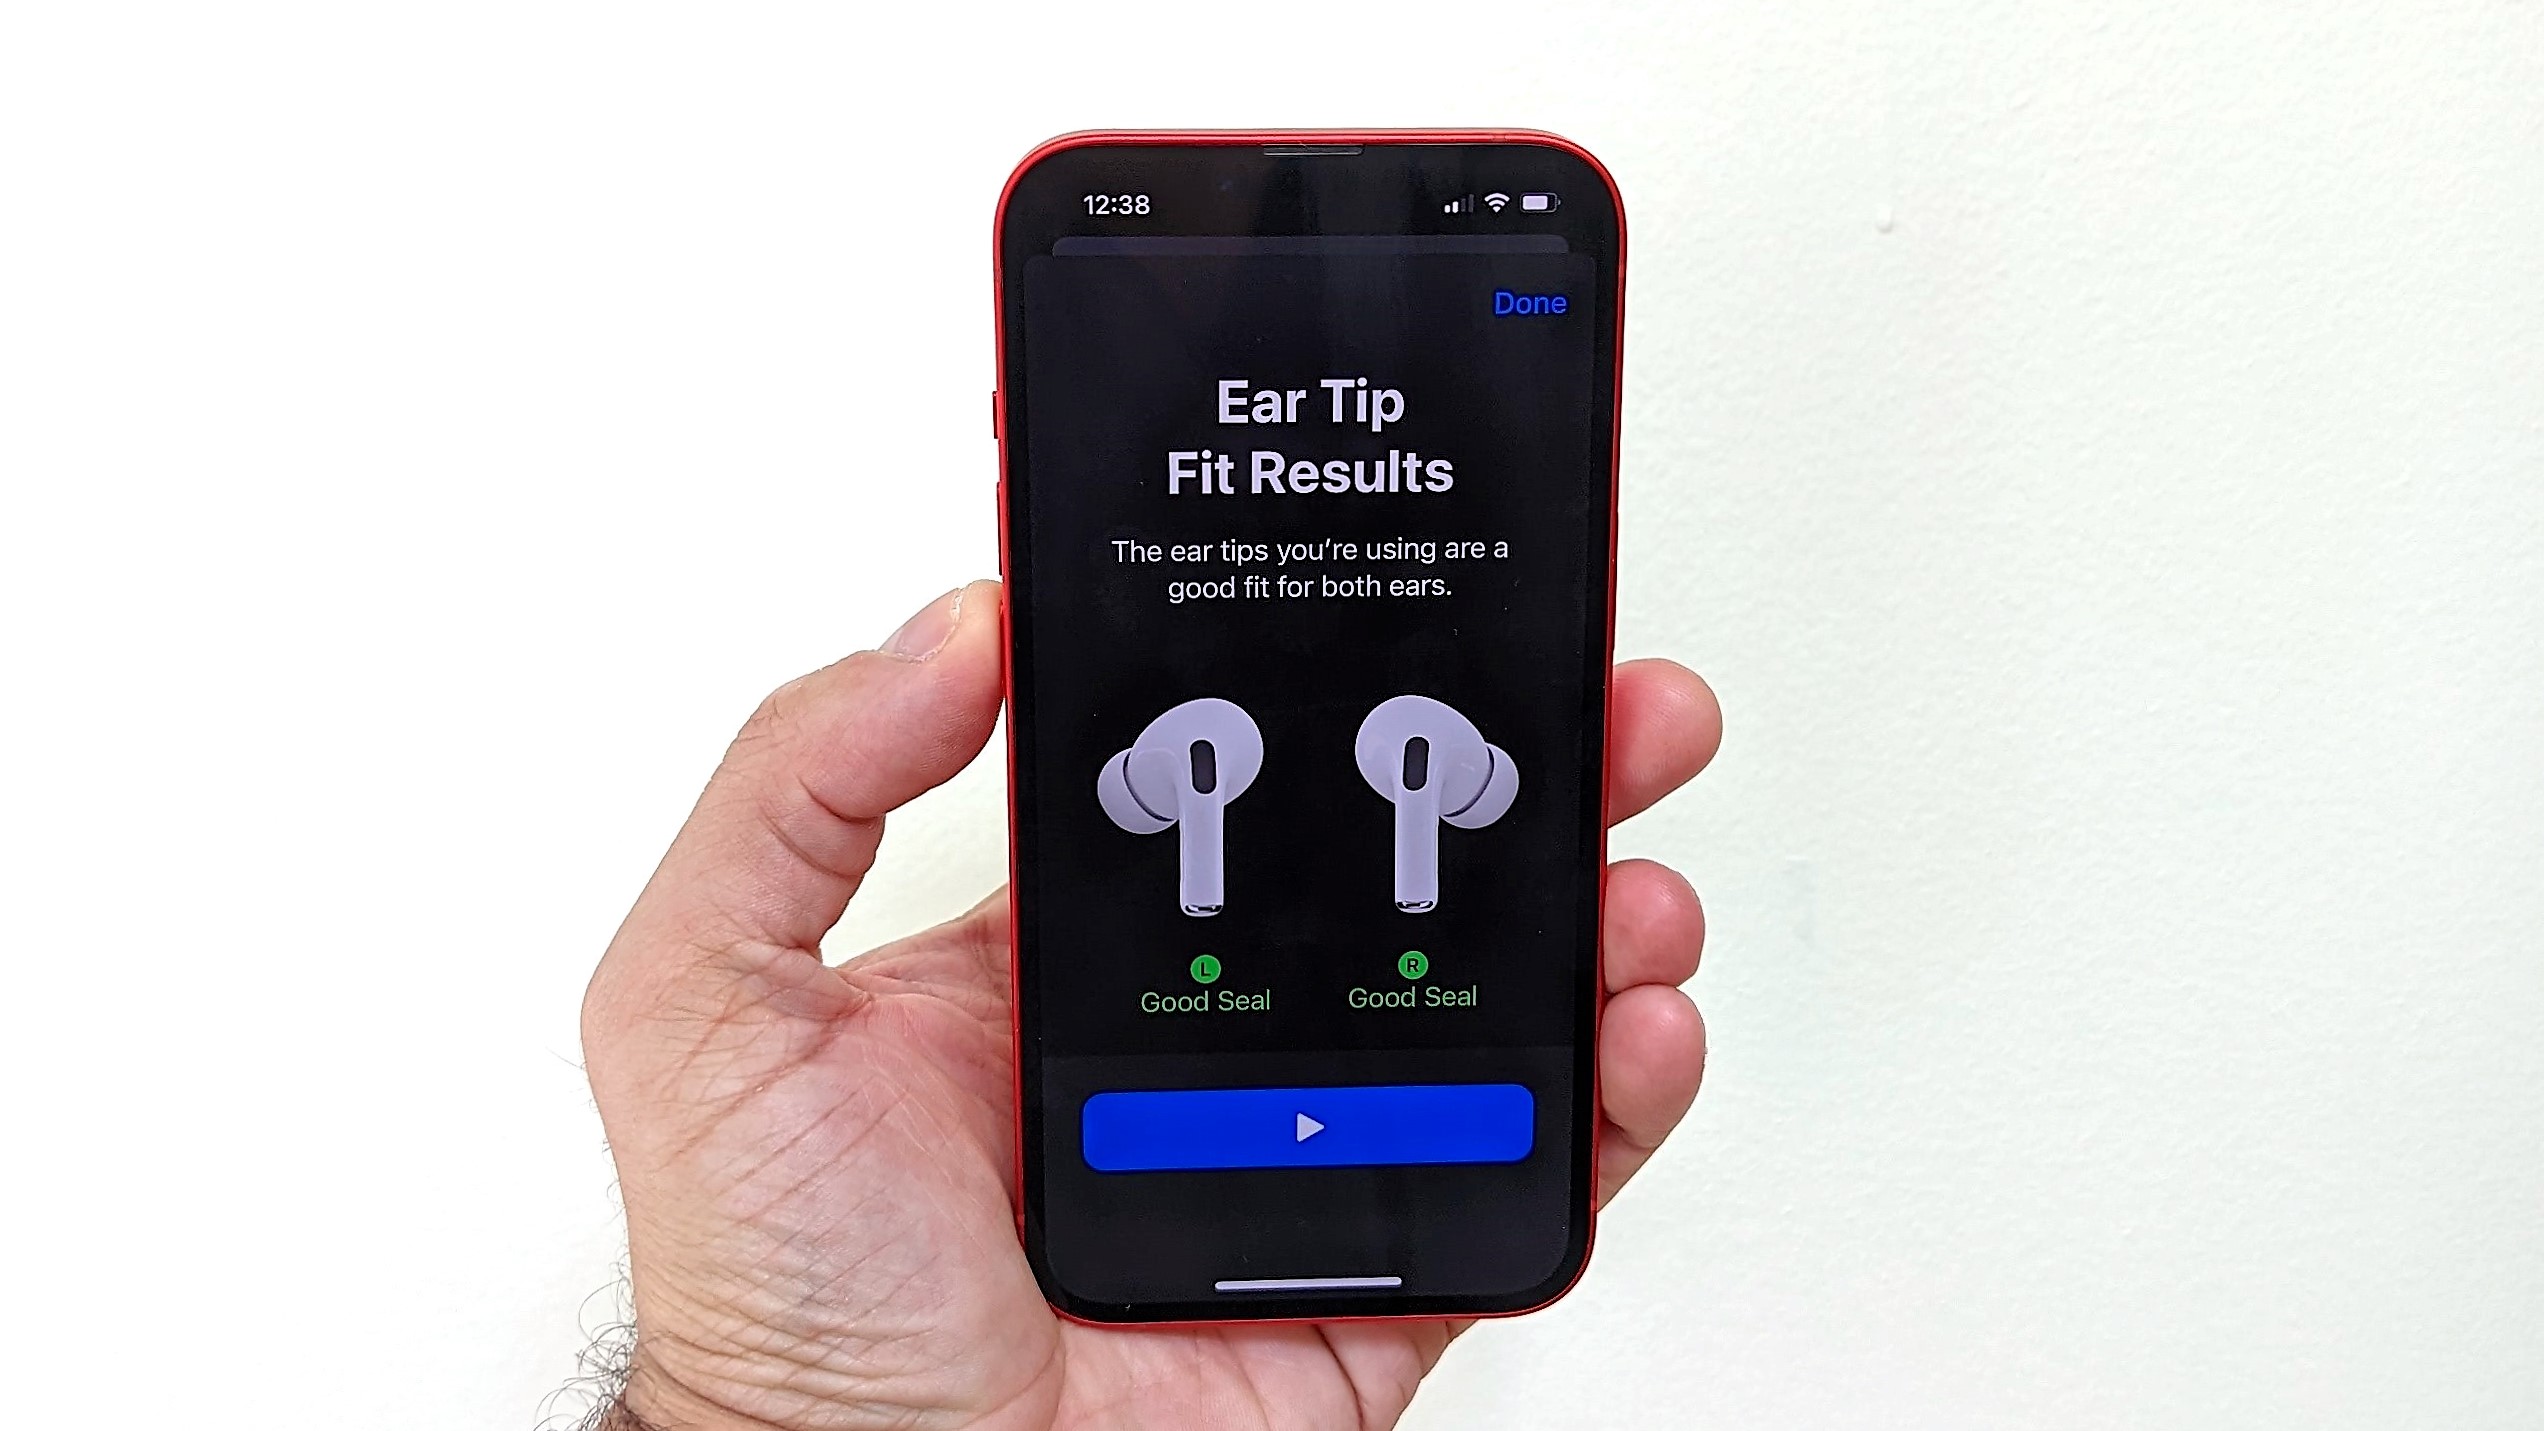 Showing fit test screen for AirPods Pro 2